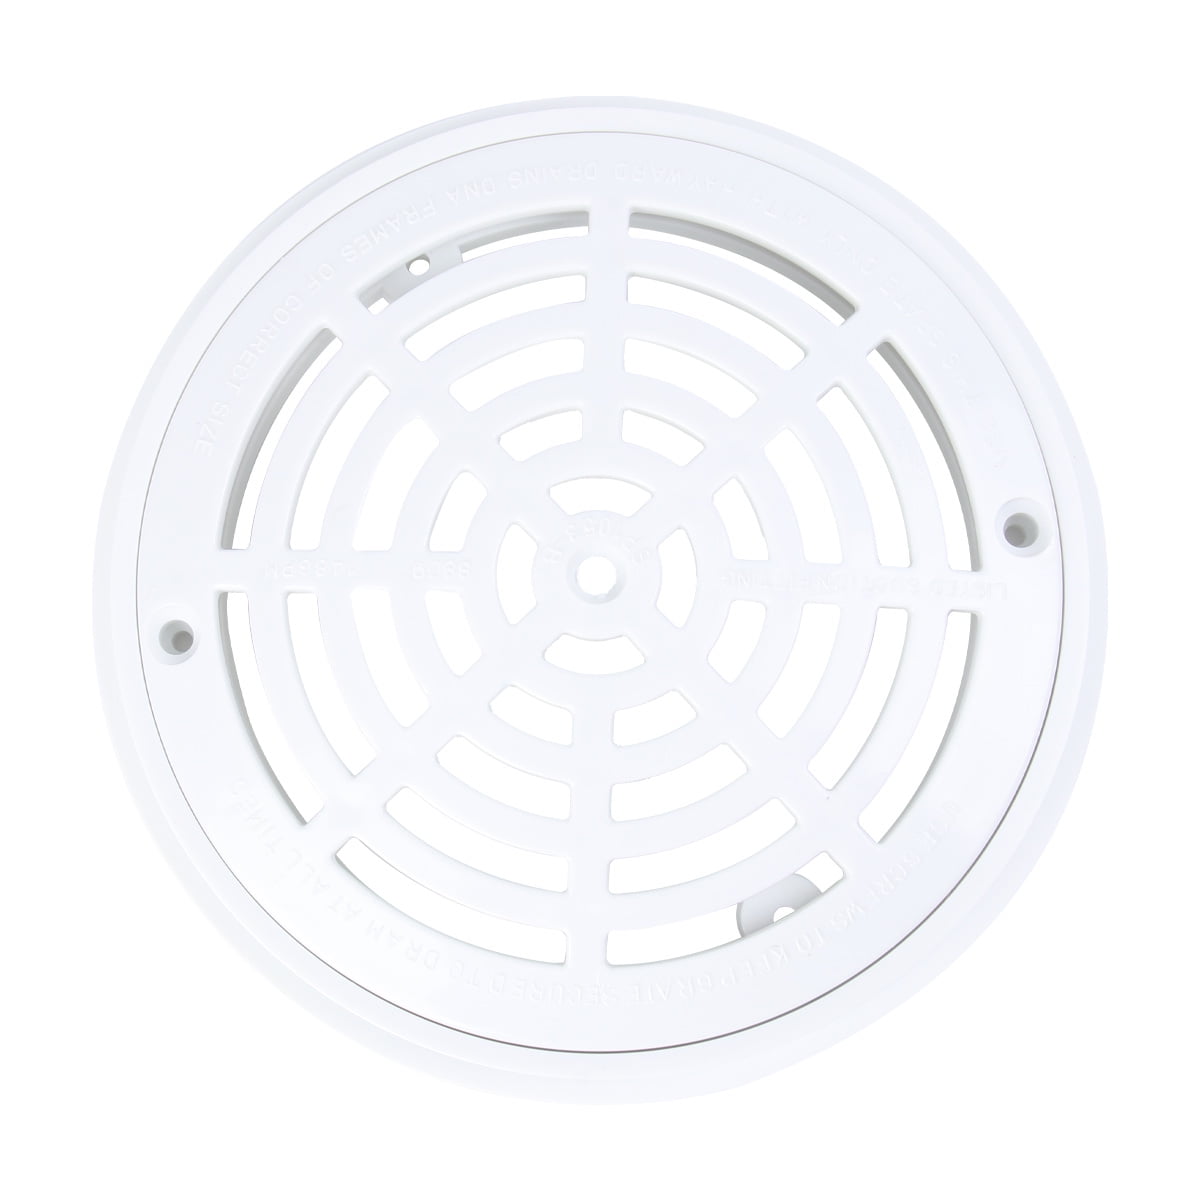 Anti-Vortex Main Drain Suction Cover Plate for In-Ground Swimming Pools 